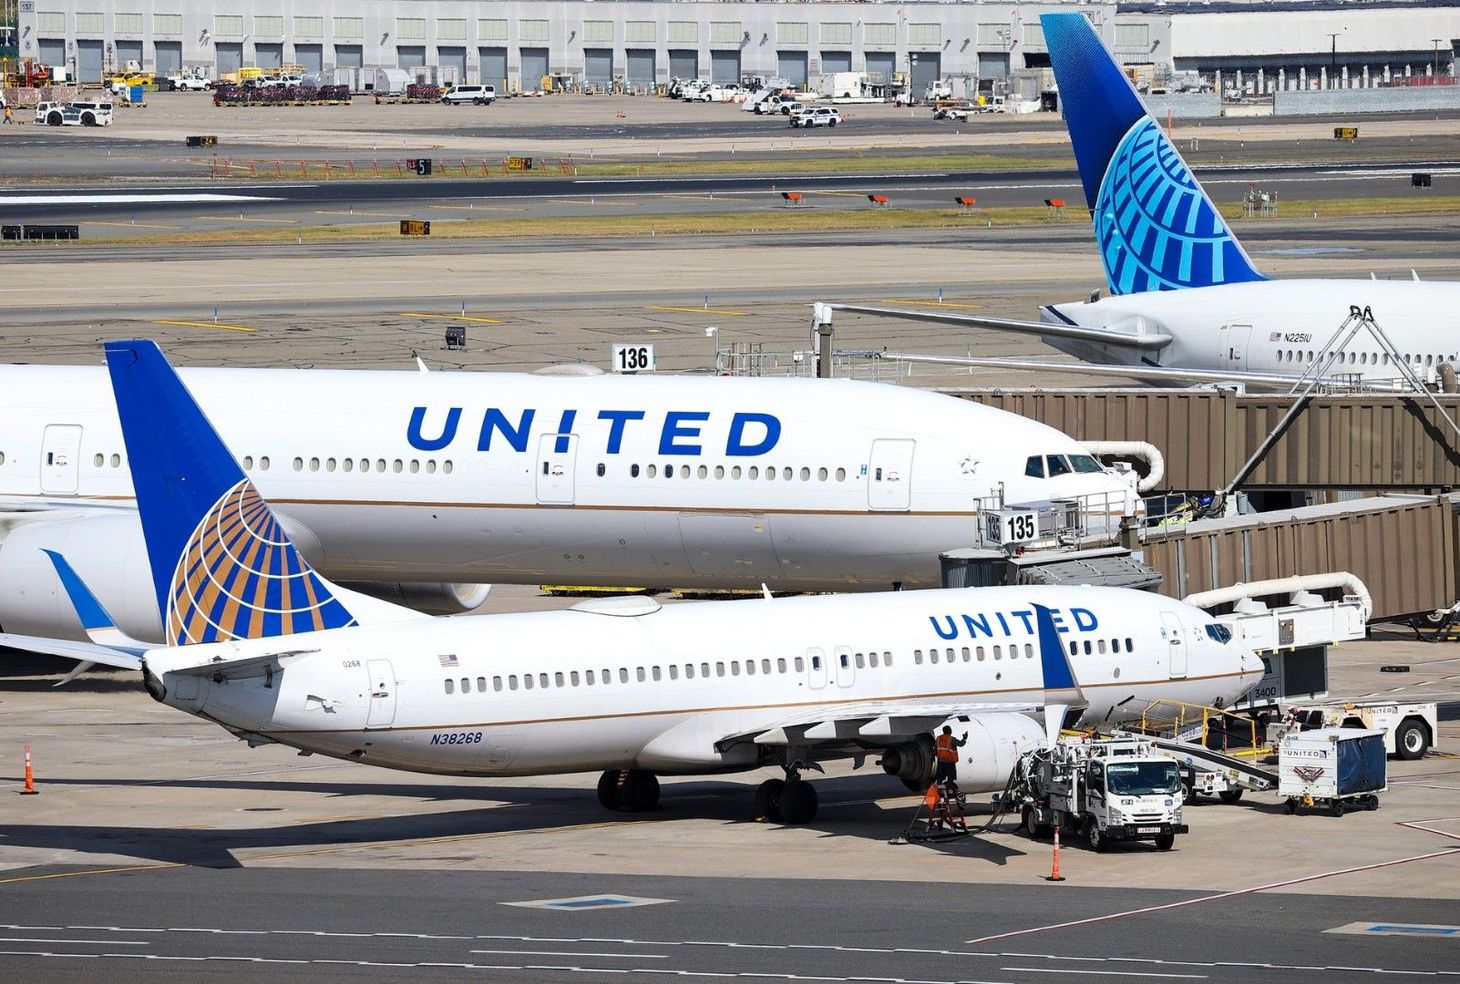 United Airlines reaps $942 million profit on strong summer